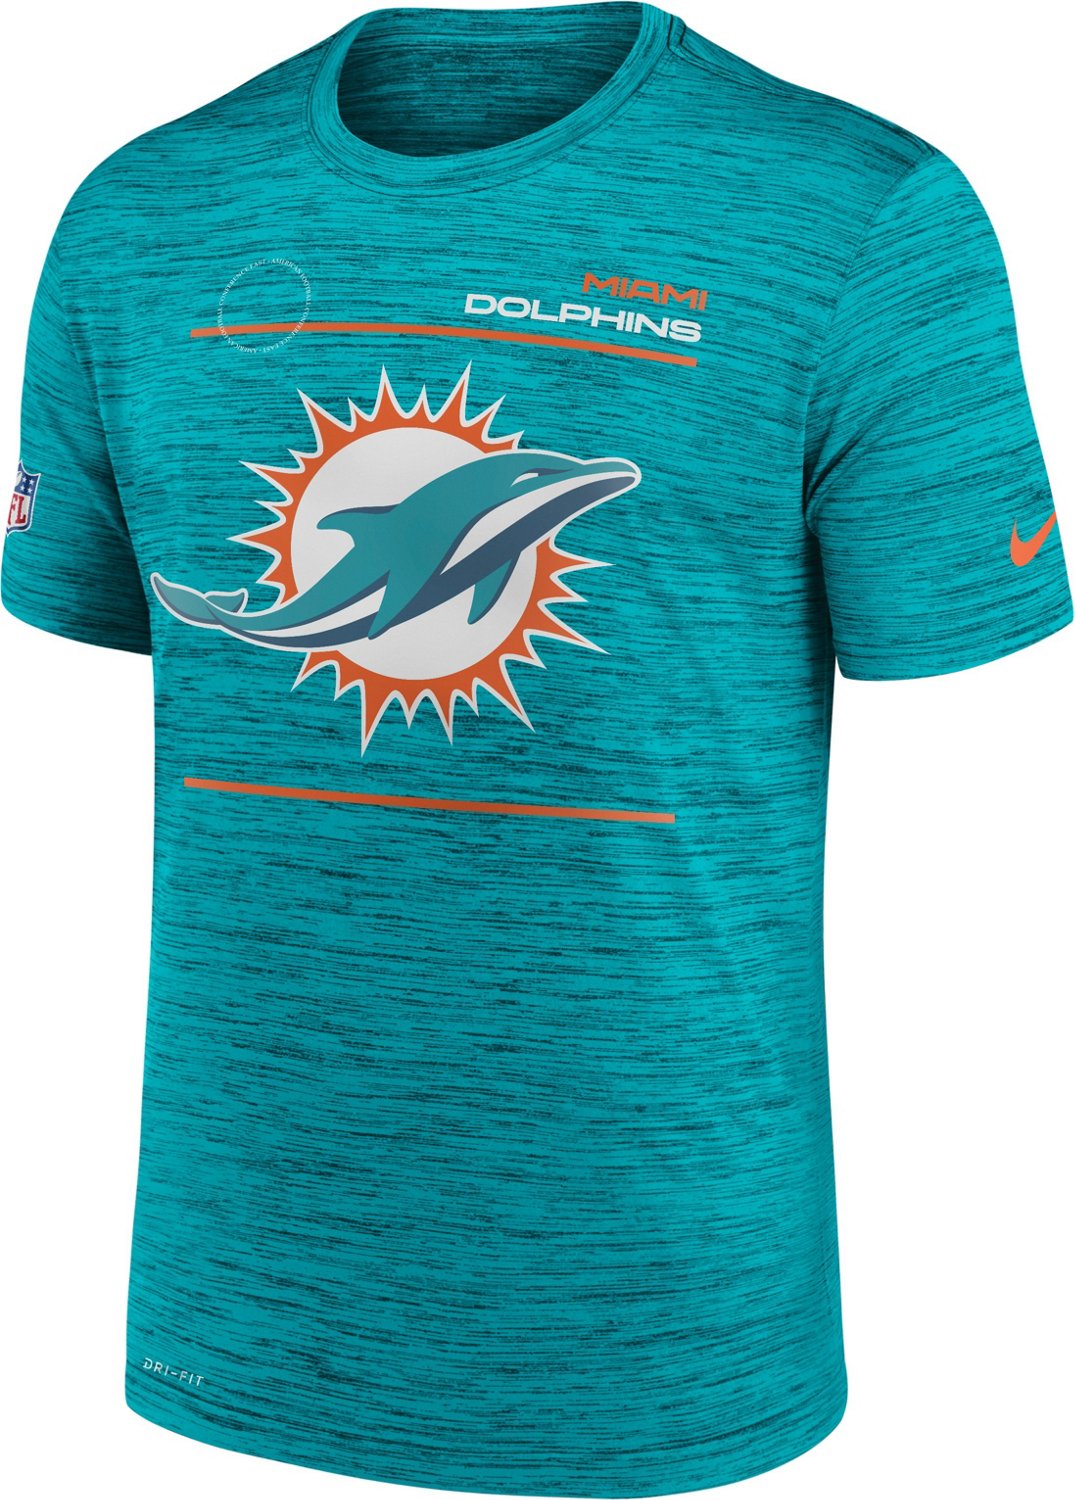 Nike Men's Miami Dolphins Velocity Sideline Graphic T-shirt | Academy